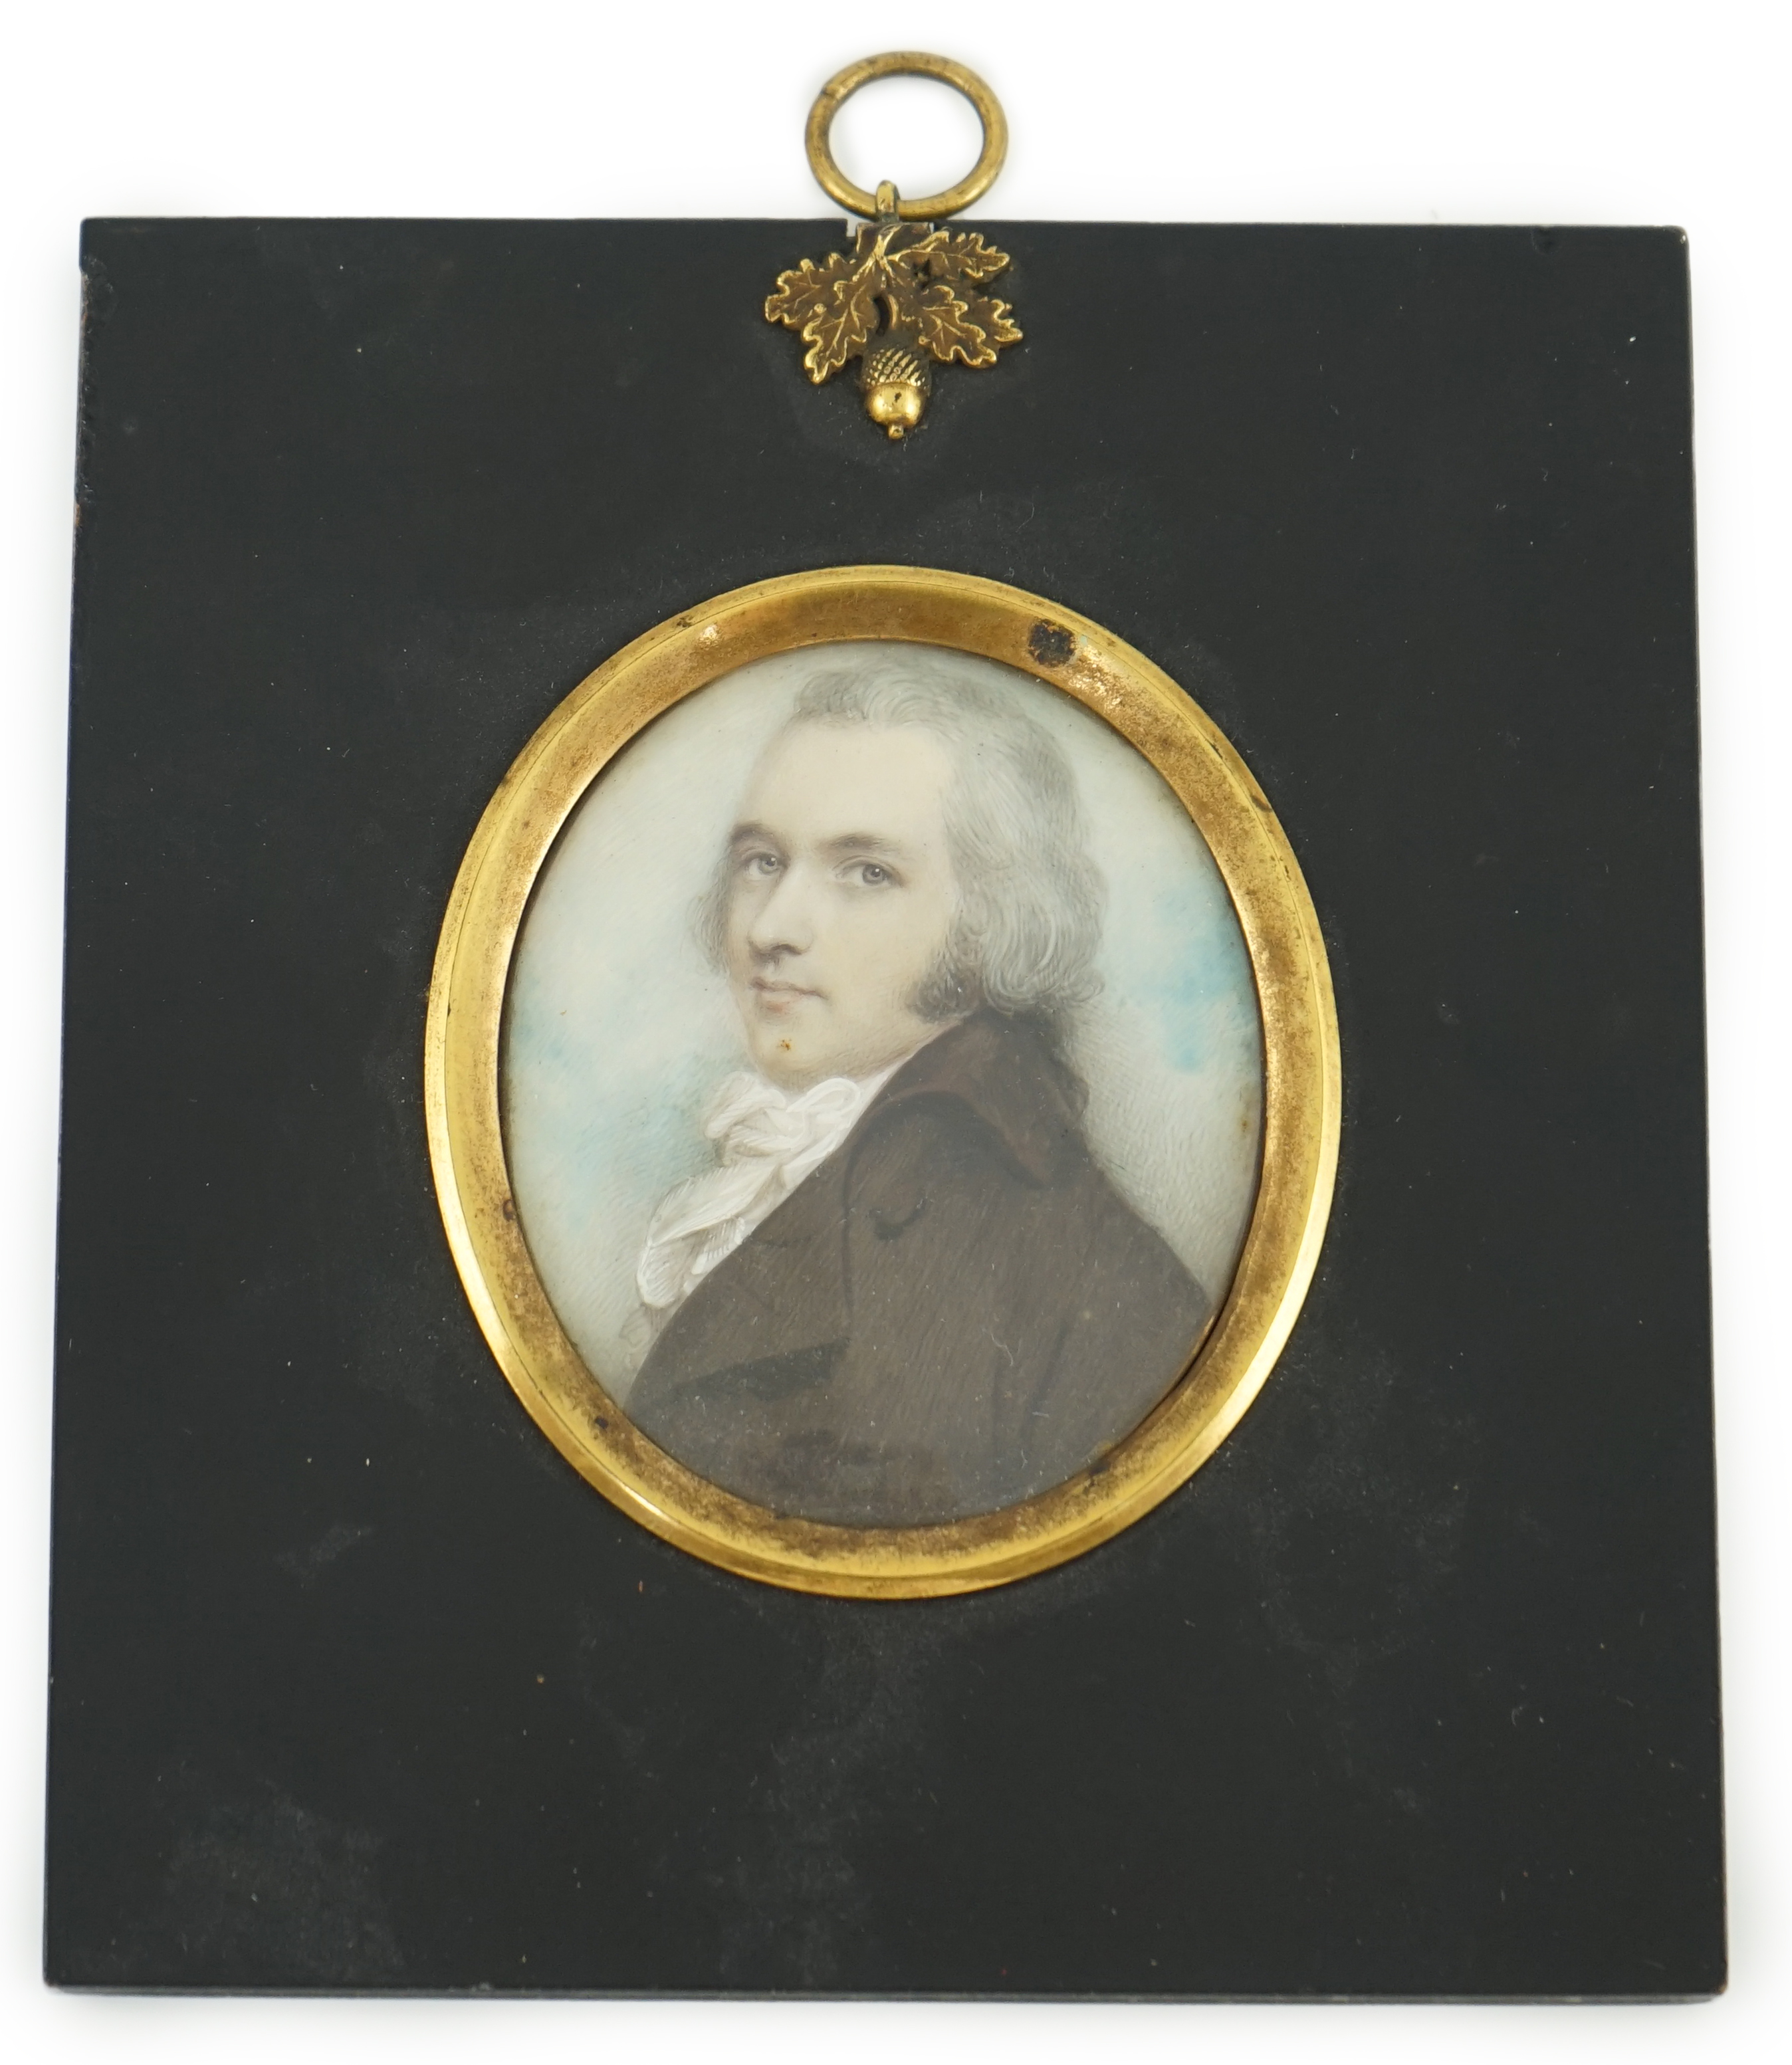 Attributed to Andrew Plimer (1763-1837), Portrait miniature of a gentleman, watercolour on ivory, 6.5 x 5.5cm. CITES Submission reference PSNJZWJ5